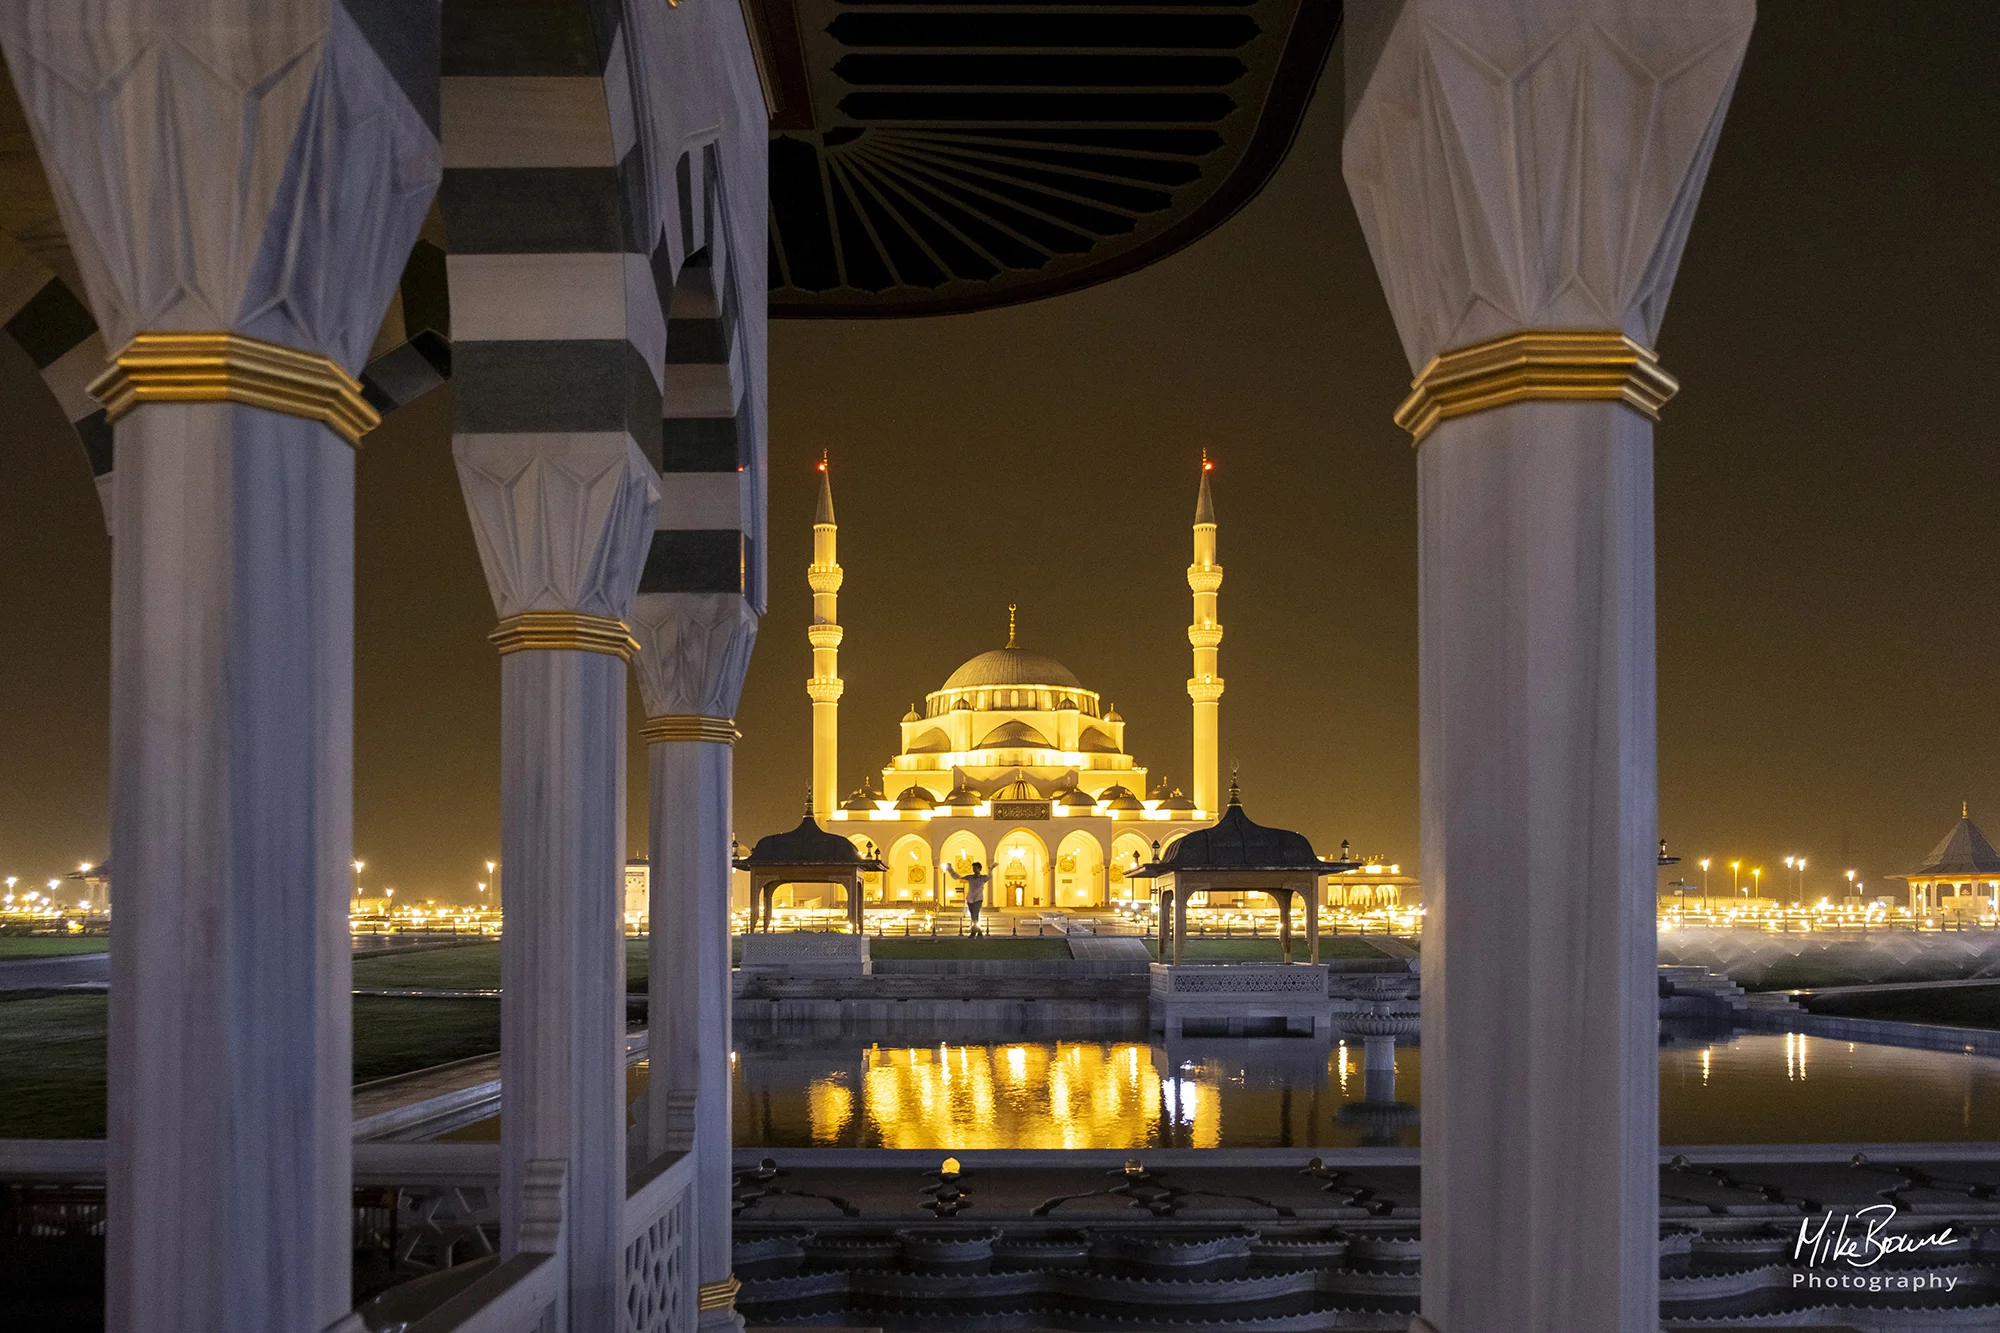 Distant man raising his arms at floodlit Sharjah Mosque, UAE